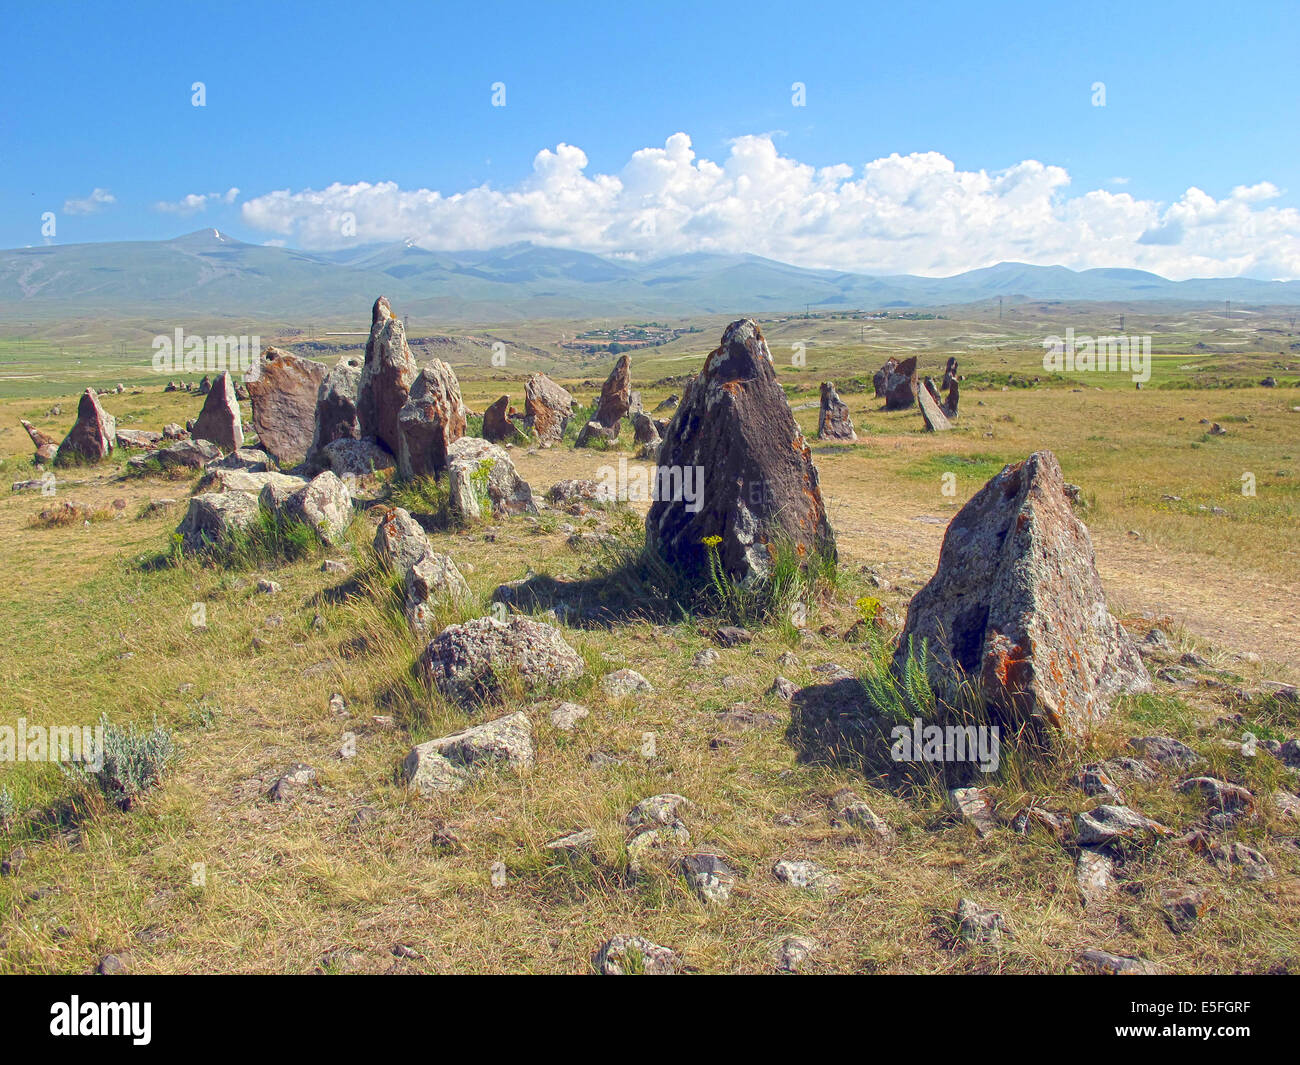 Sisian, Armenia. 27th June, 2014. Megaliths are seen at the prehistoric archaeological site Zorats Karer near Sisian, Armenia, 27 June 2014. The site served as a necropolis from the Middle Bronze Age to the Iron Age. Photo: Jens Kalaene -NO WIRE SERVICE-/dpa/Alamy Live News Stock Photo